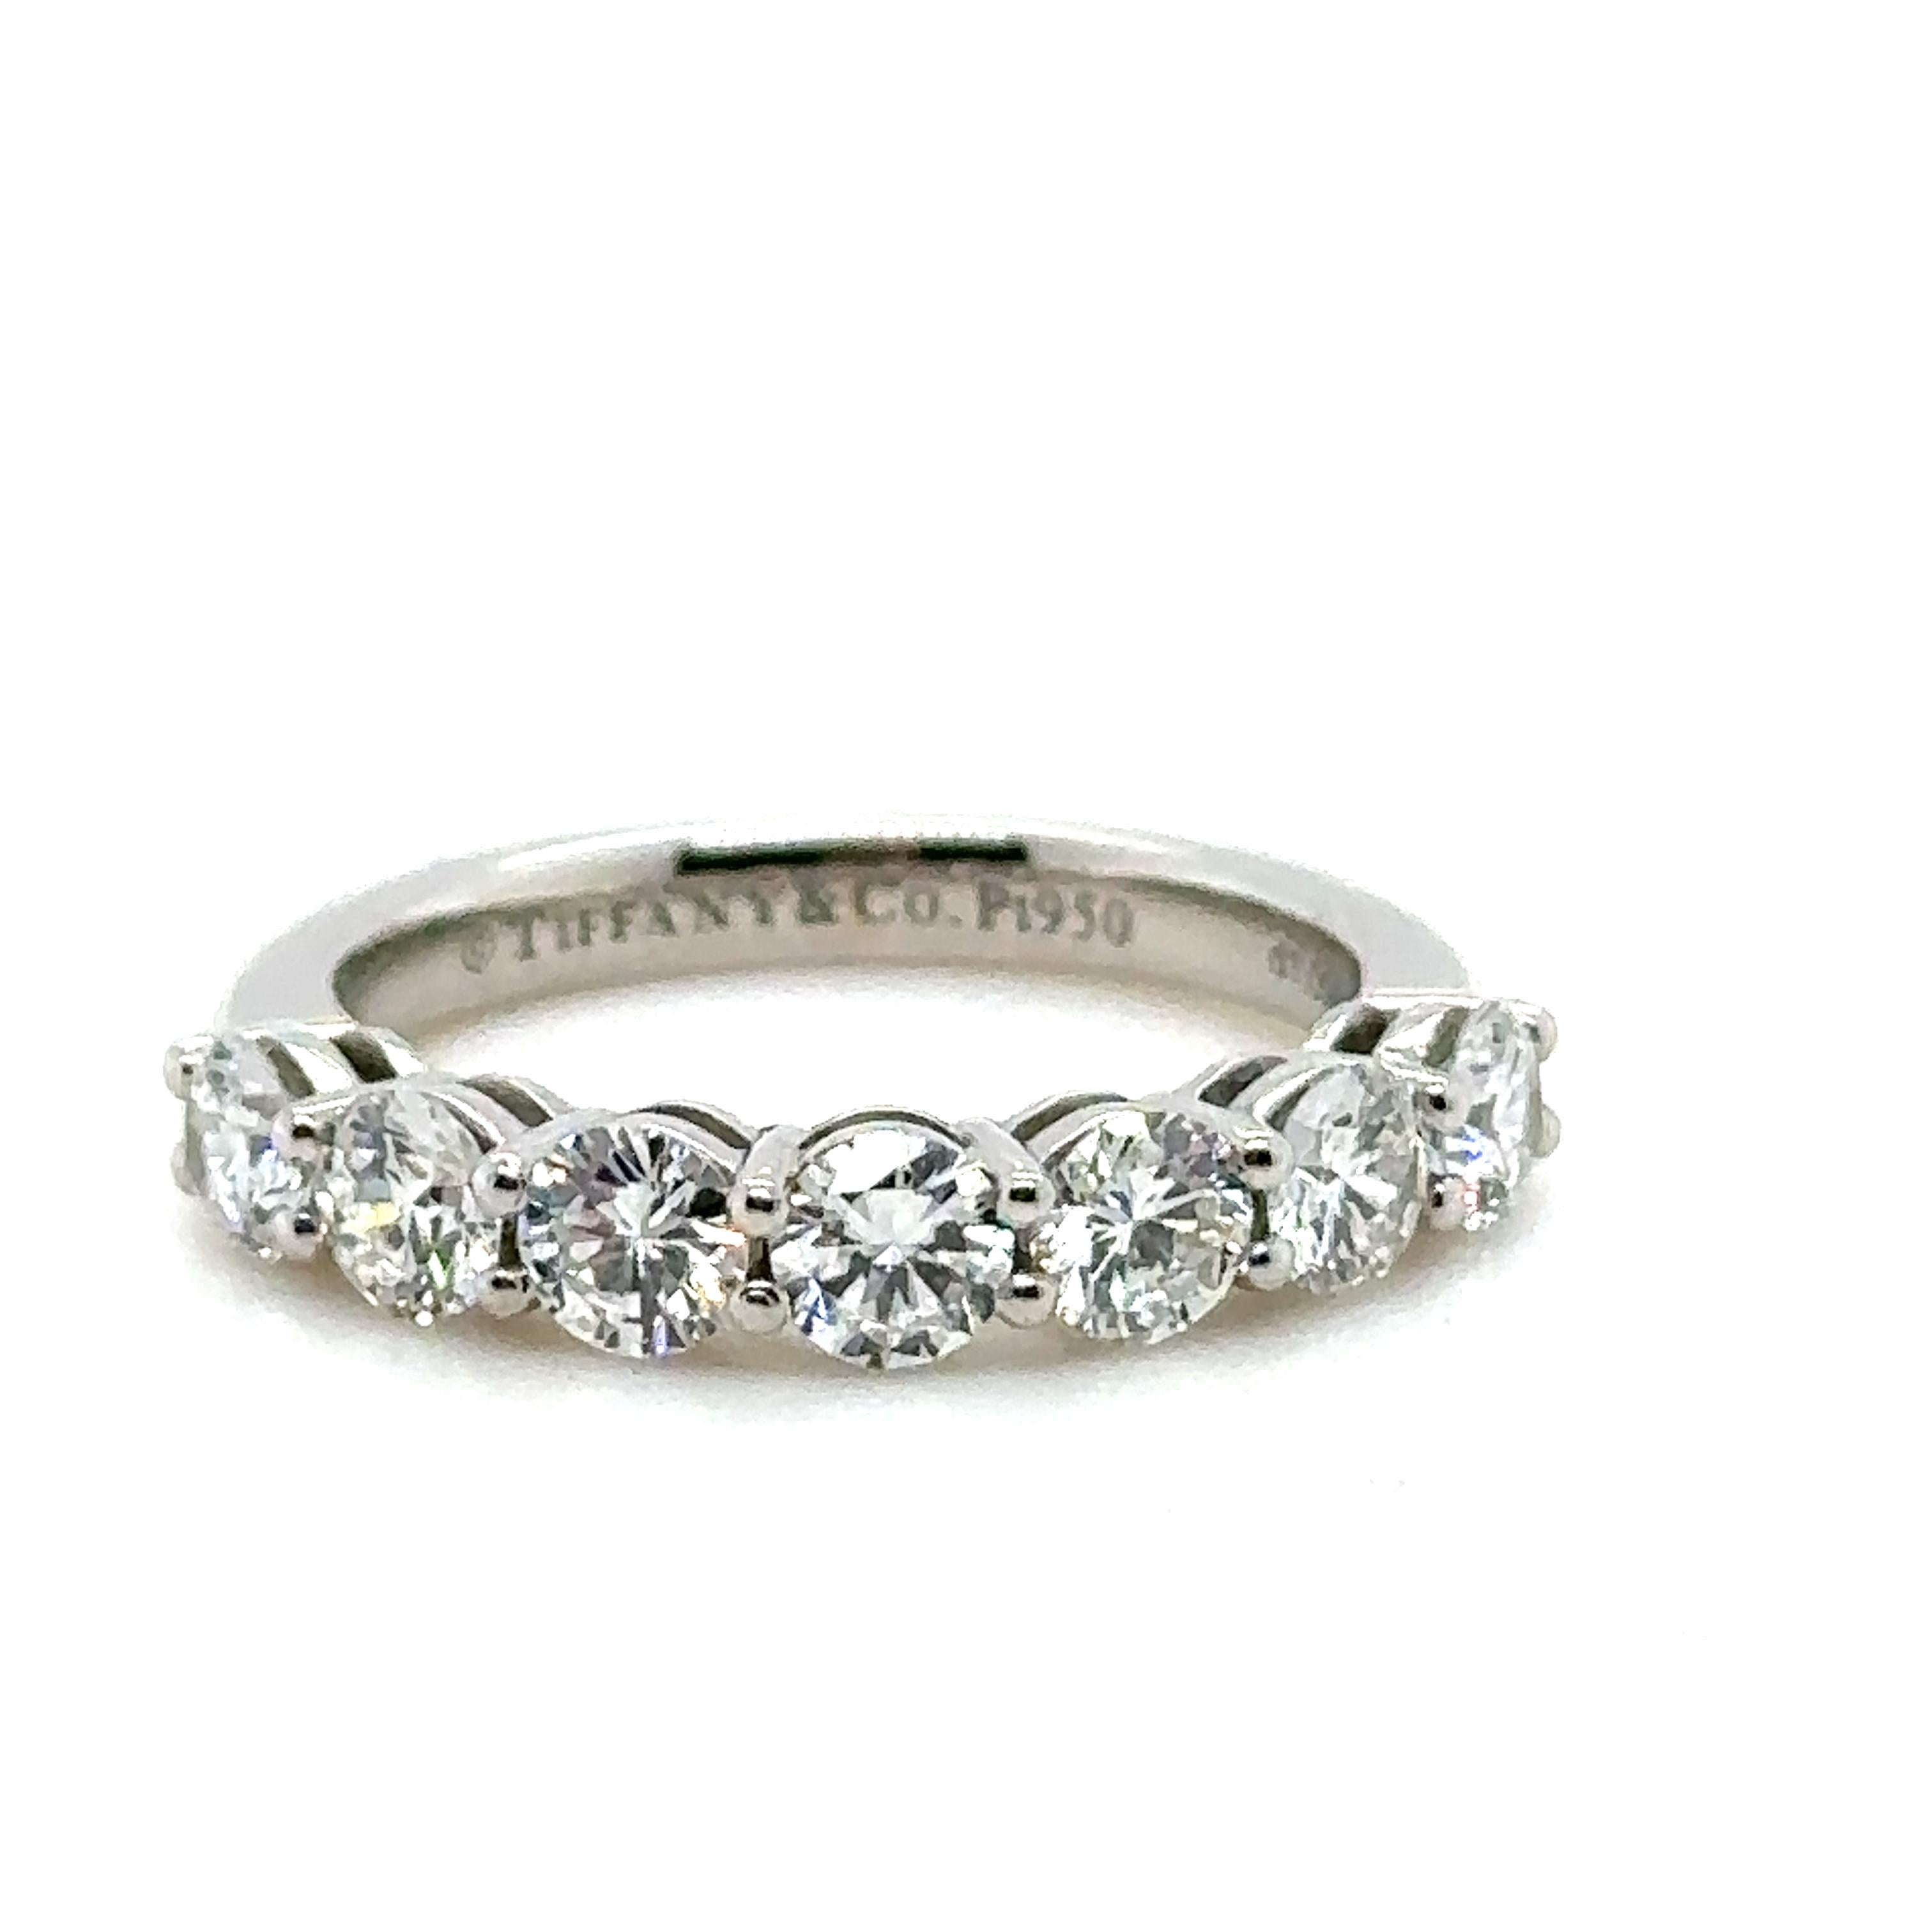 Unique features:

Tiffany & Co. Half eternity diamond ring. 950 Platinum, and weighing 4.43 gm.

Stamped: Tiffany & Co. Pt950.

Set with 7 round, brilliant cut Diamonds, colour F-G and clarity VVS-VS with a total weight of 1.09ct.
Metal: 950